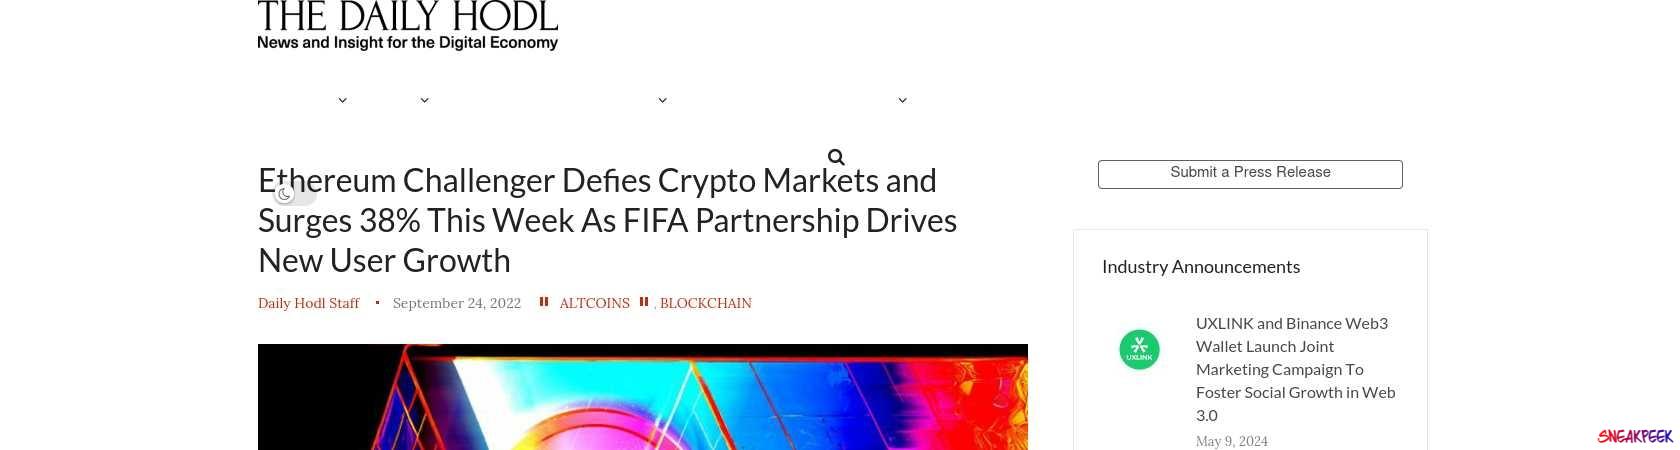 Read the full Article:  ⭲ Ethereum Challenger Defies Crypto Markets and Surges 38% This Week As FIFA Partnership Drives New User Growth